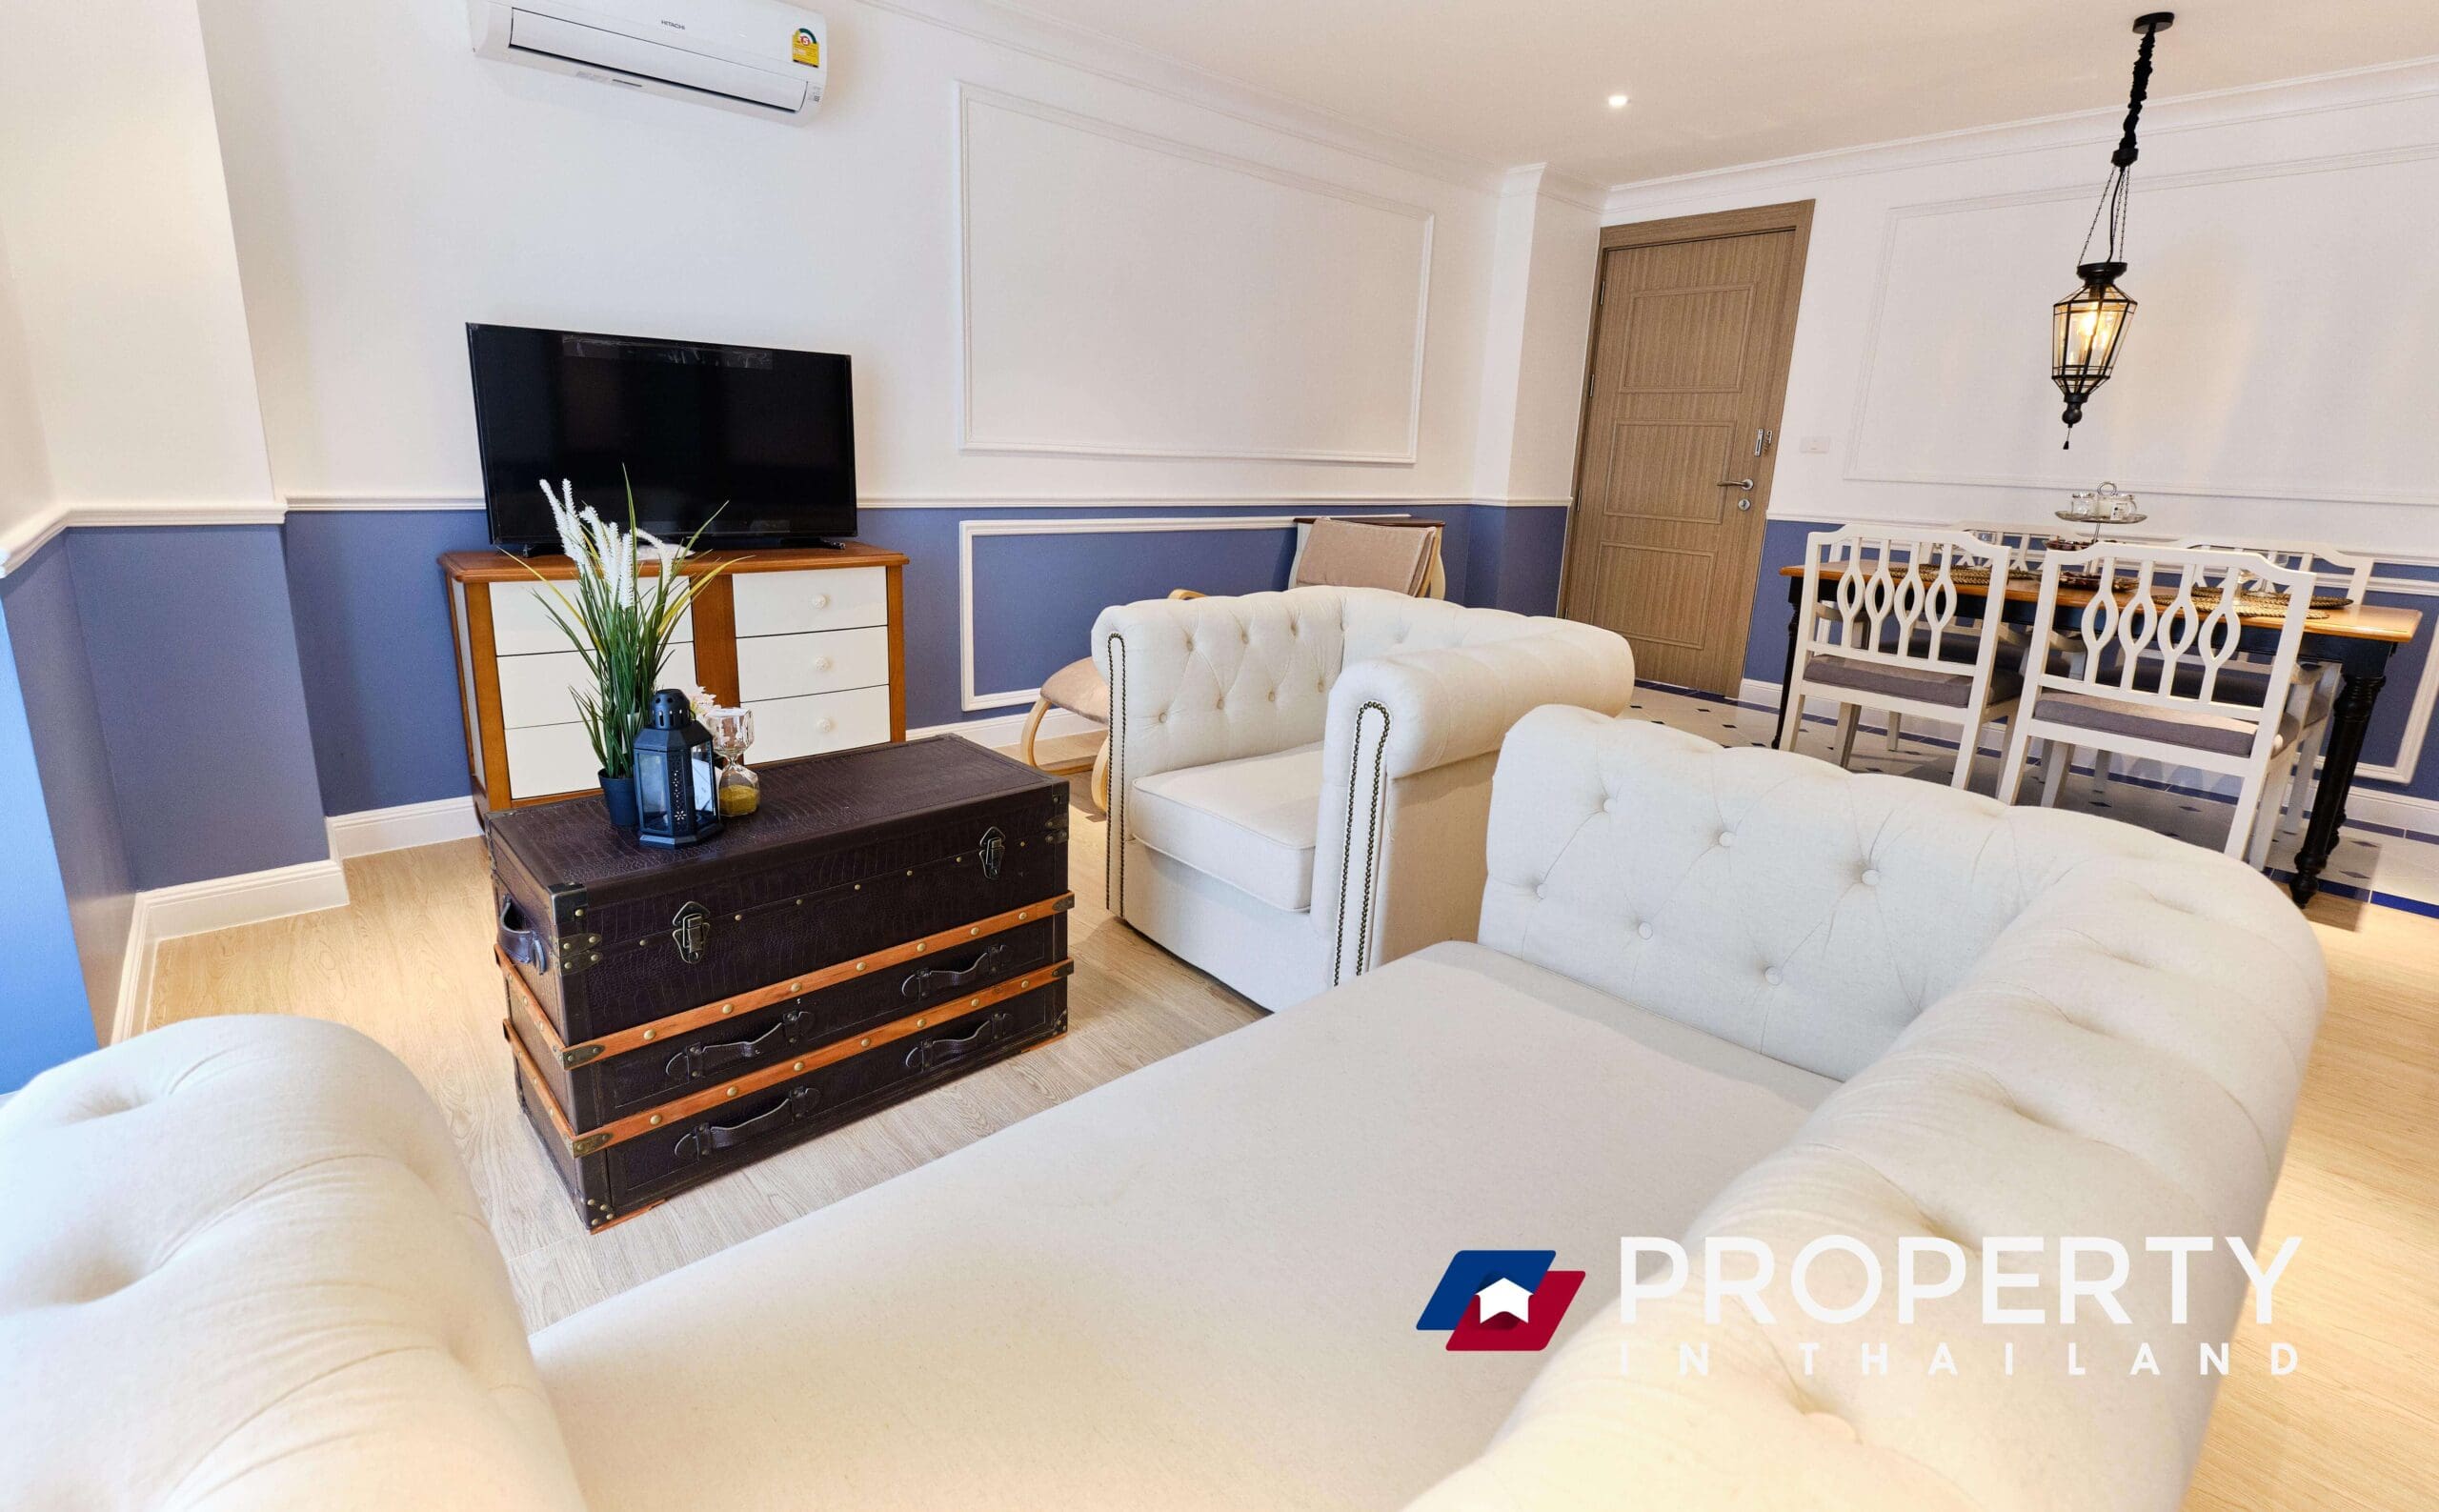 Property in Thailand (1Bed - 54) - Living room